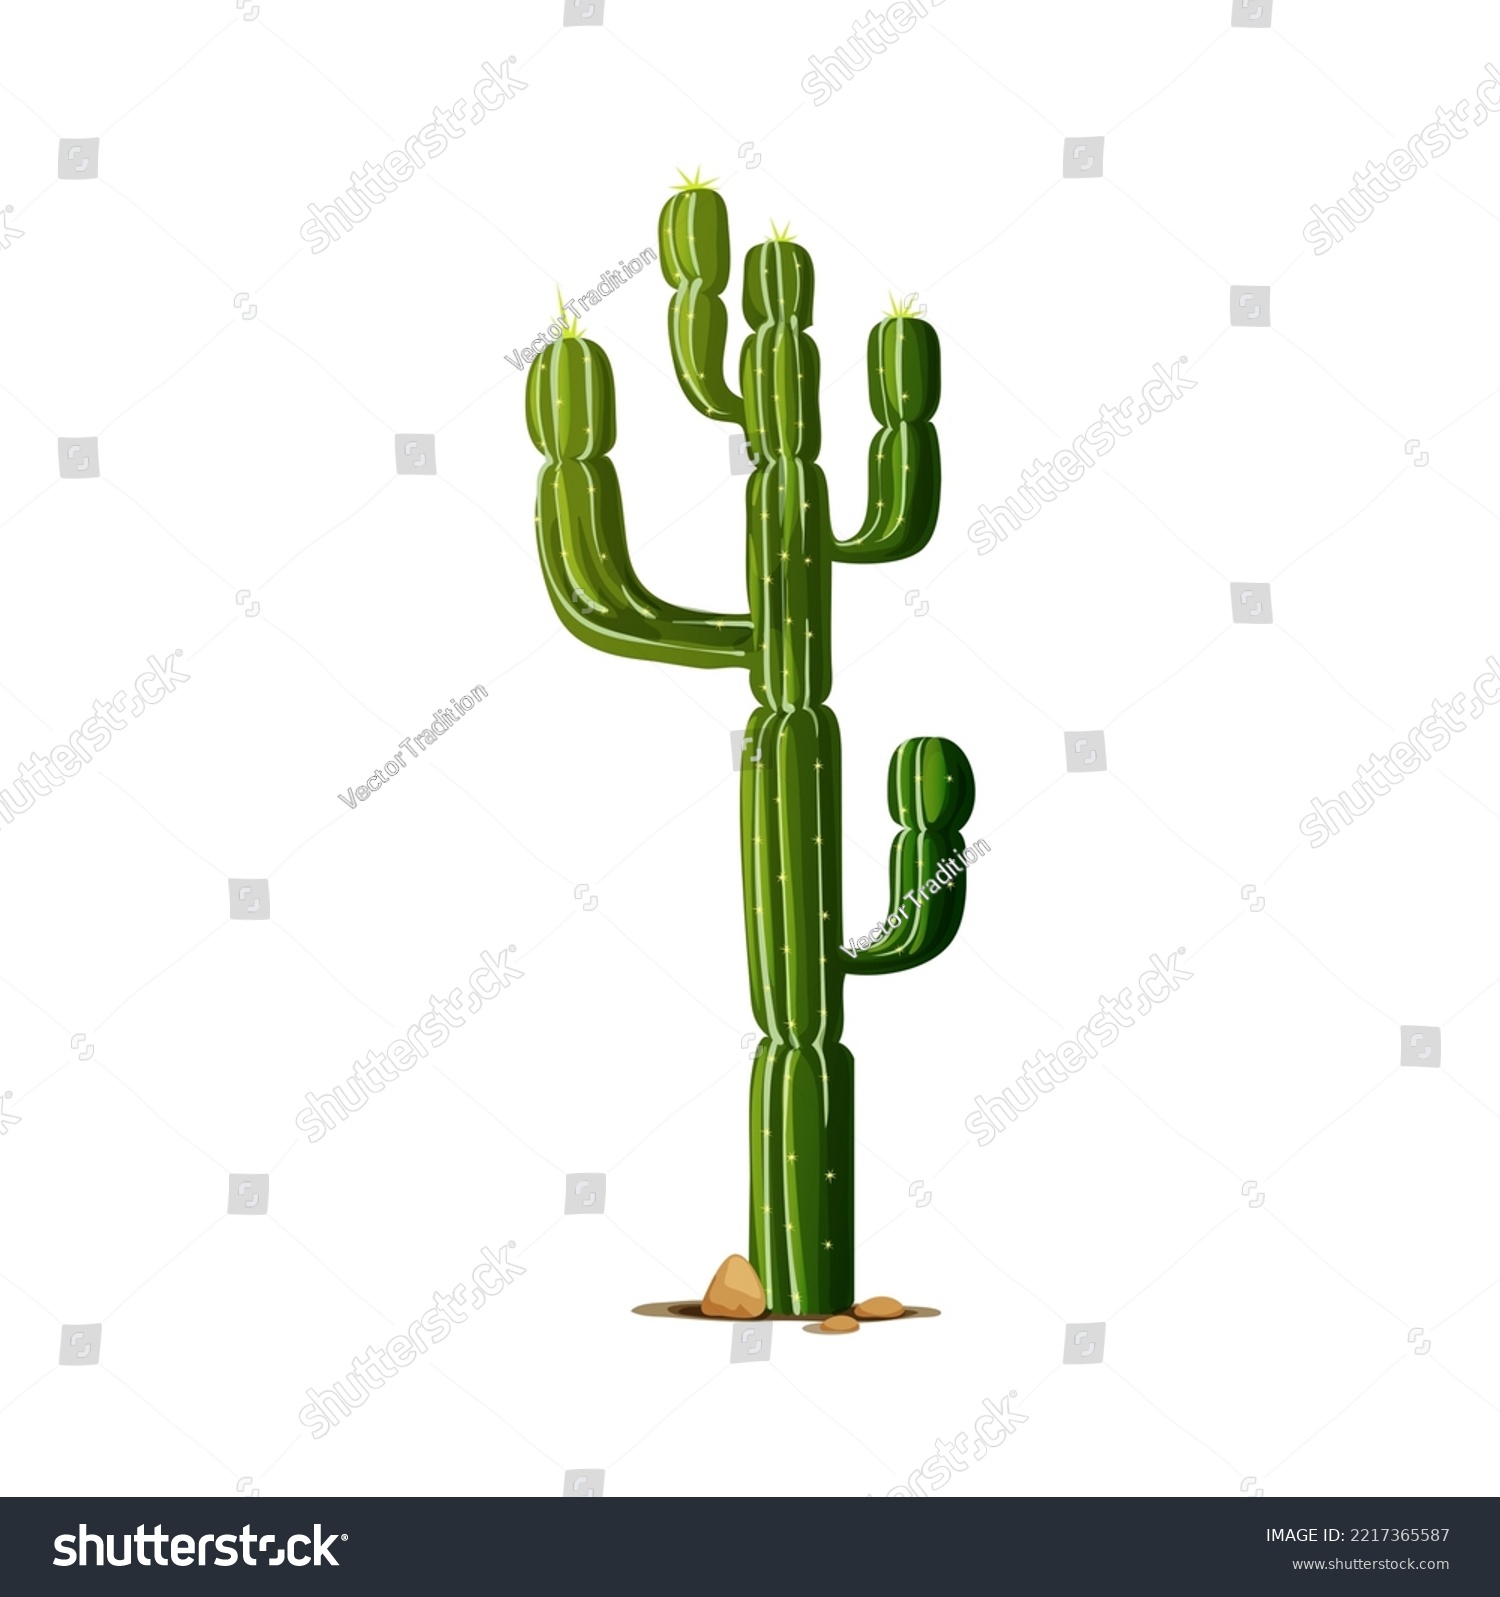 SVG of Elephant cactus, tropical succulent grown in desert isolated cartoon indians cacti with thorns. Vector prickly plant tall spiky tree, scandinavian or mexican cardon with spikes. Giant cacti plant svg